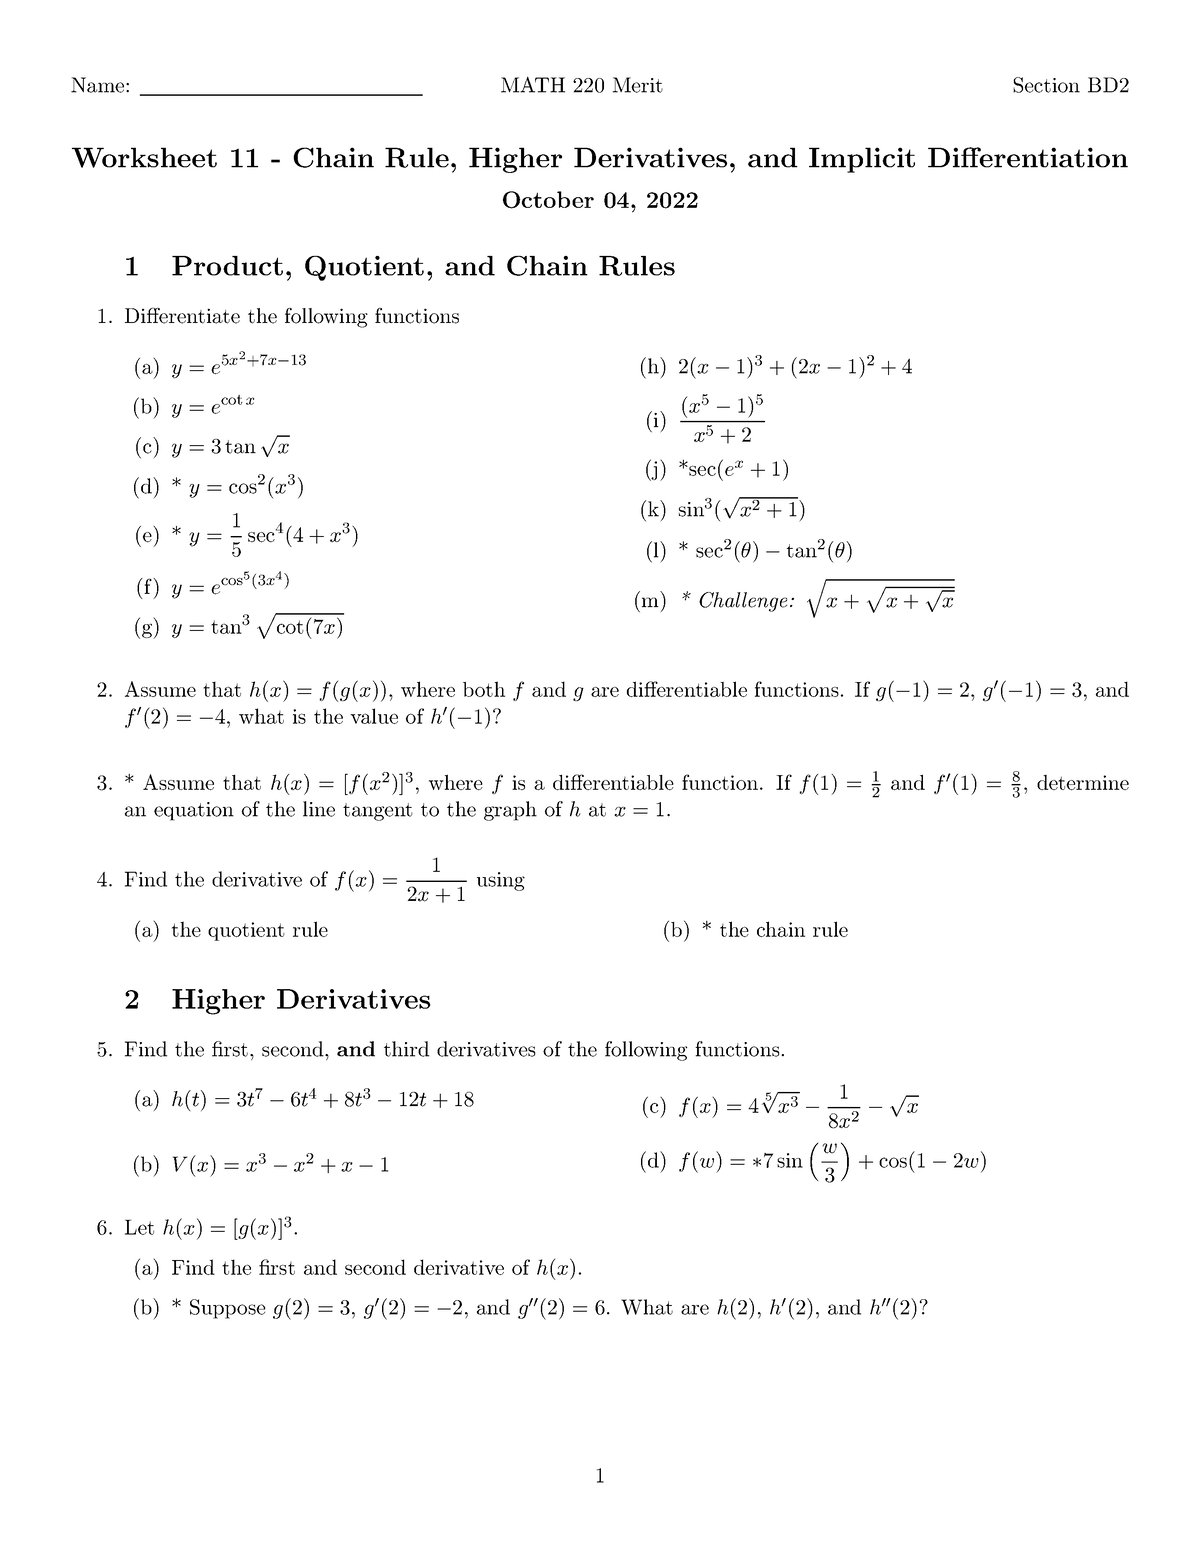 worksheet-11-04-oct-practice-problems-with-answers-name-math-220